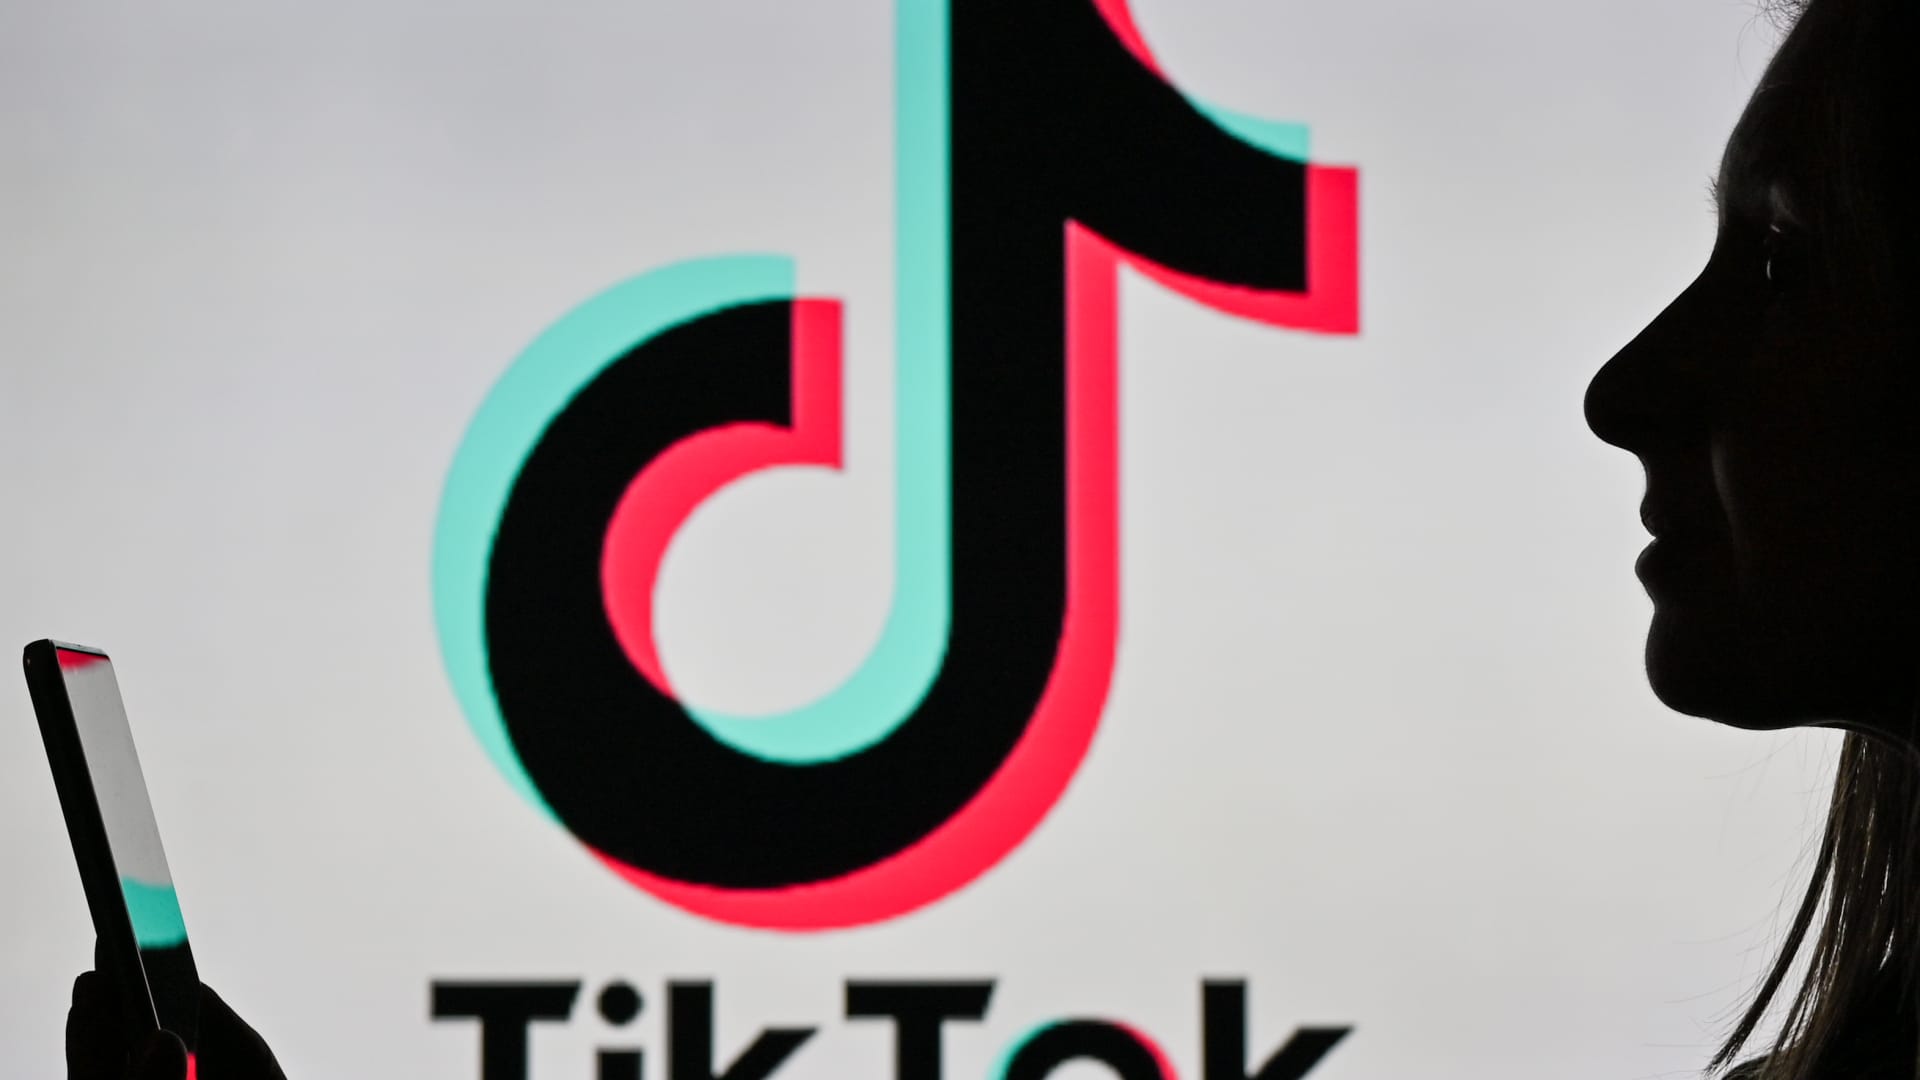 China-owned TikTok denies it could use location information to track U.S. users